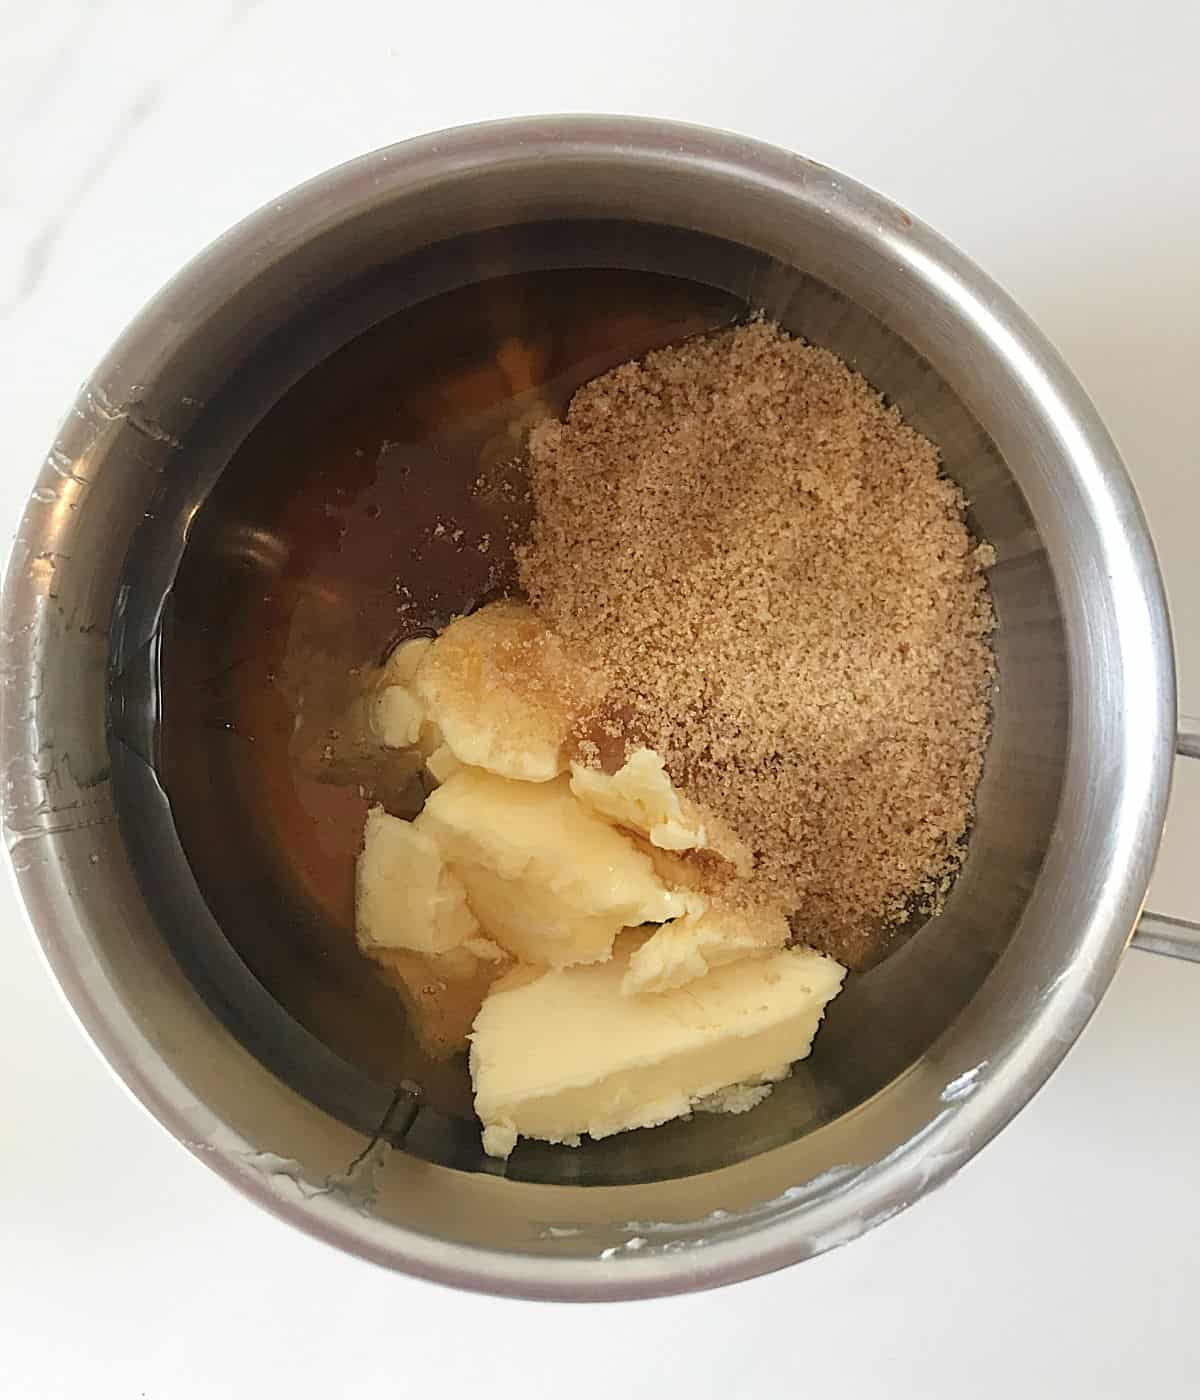 Butter, brown sugar, and honey in a metal saucepan on a white surface.